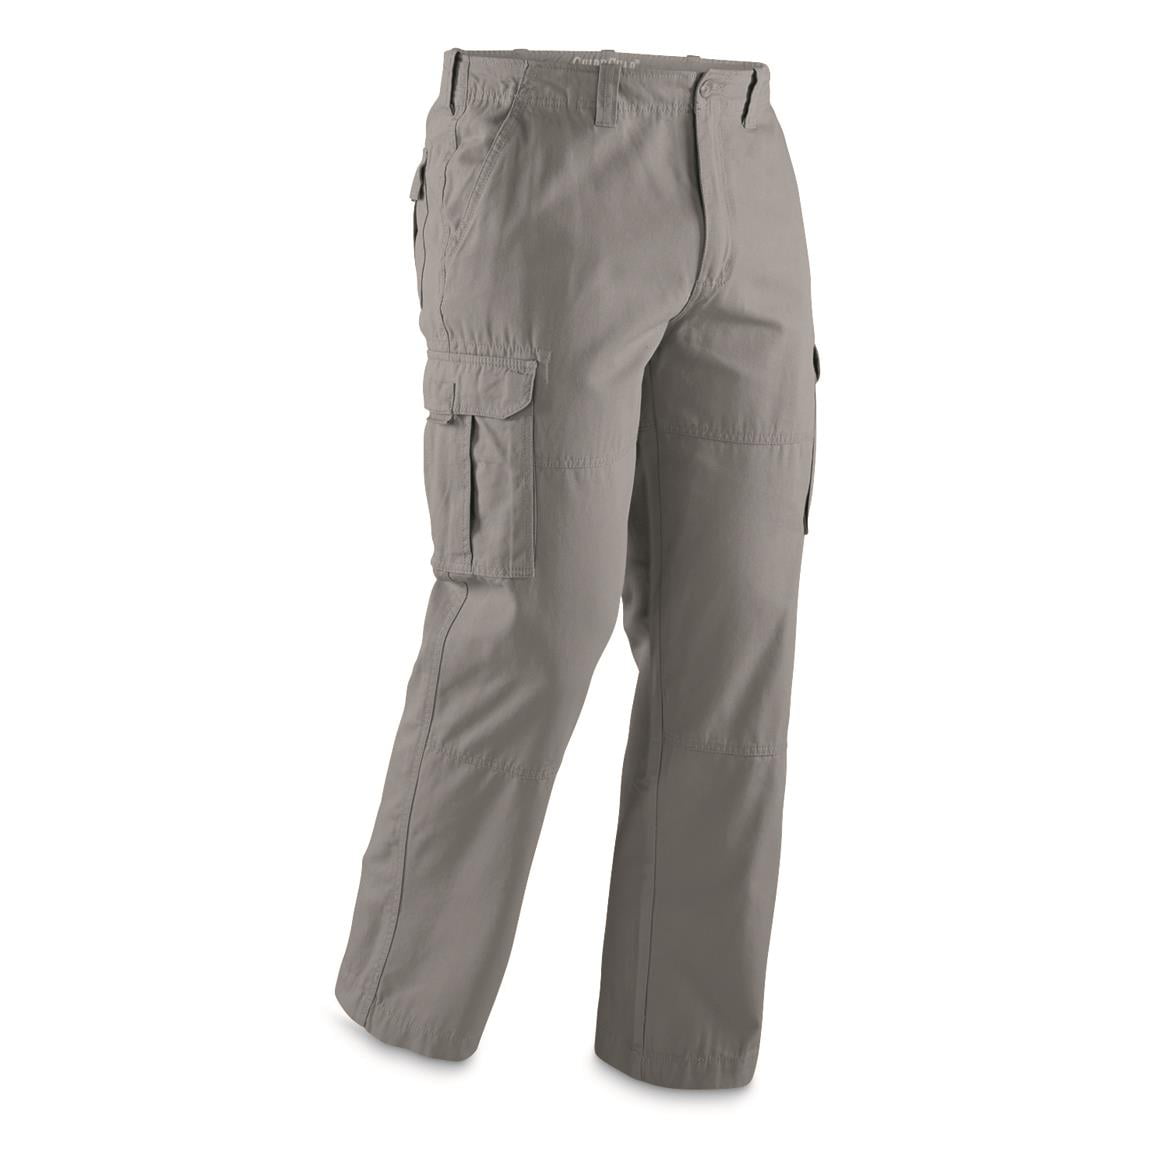 Guide Gear Cargo Pants for Men with Pockets Cotton, Tactical Work ...